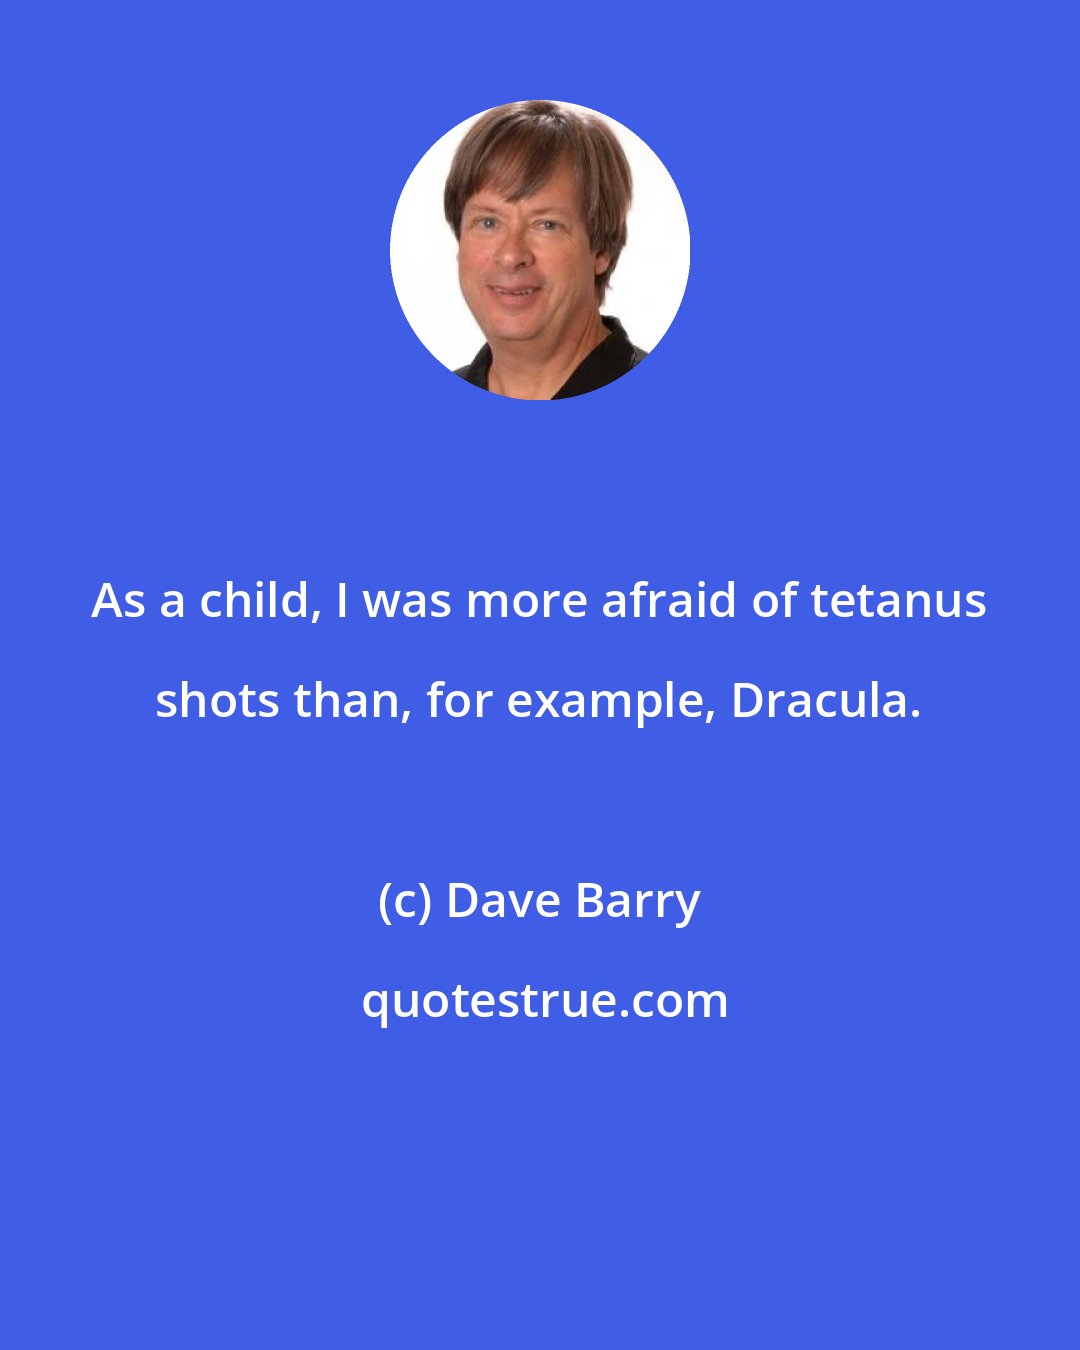 Dave Barry: As a child, I was more afraid of tetanus shots than, for example, Dracula.